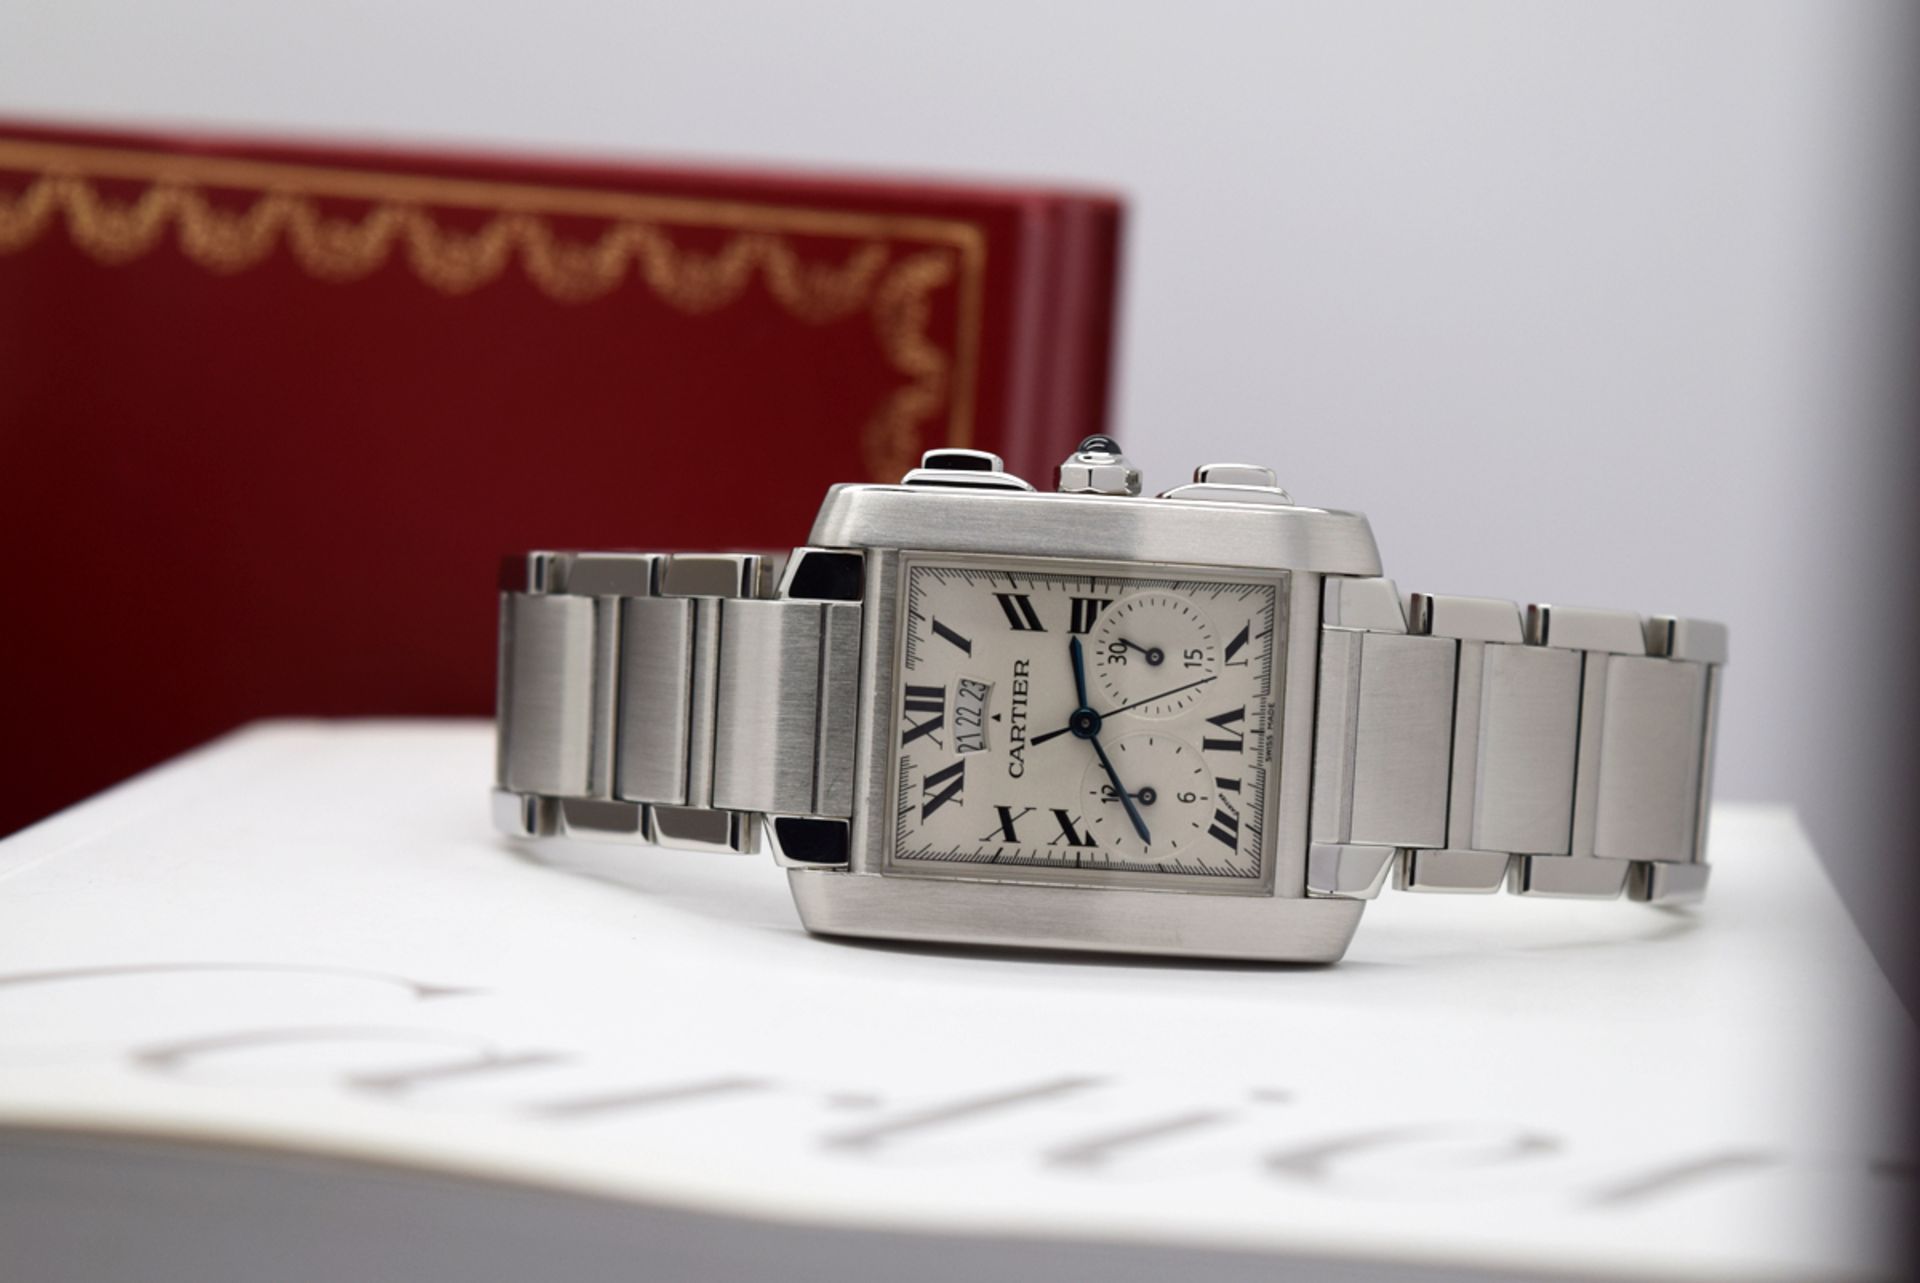 MENS CARTIER TANK CHRONOGRAPH - STAINLESS STEEL - BOX & PAPERS! - Image 2 of 12